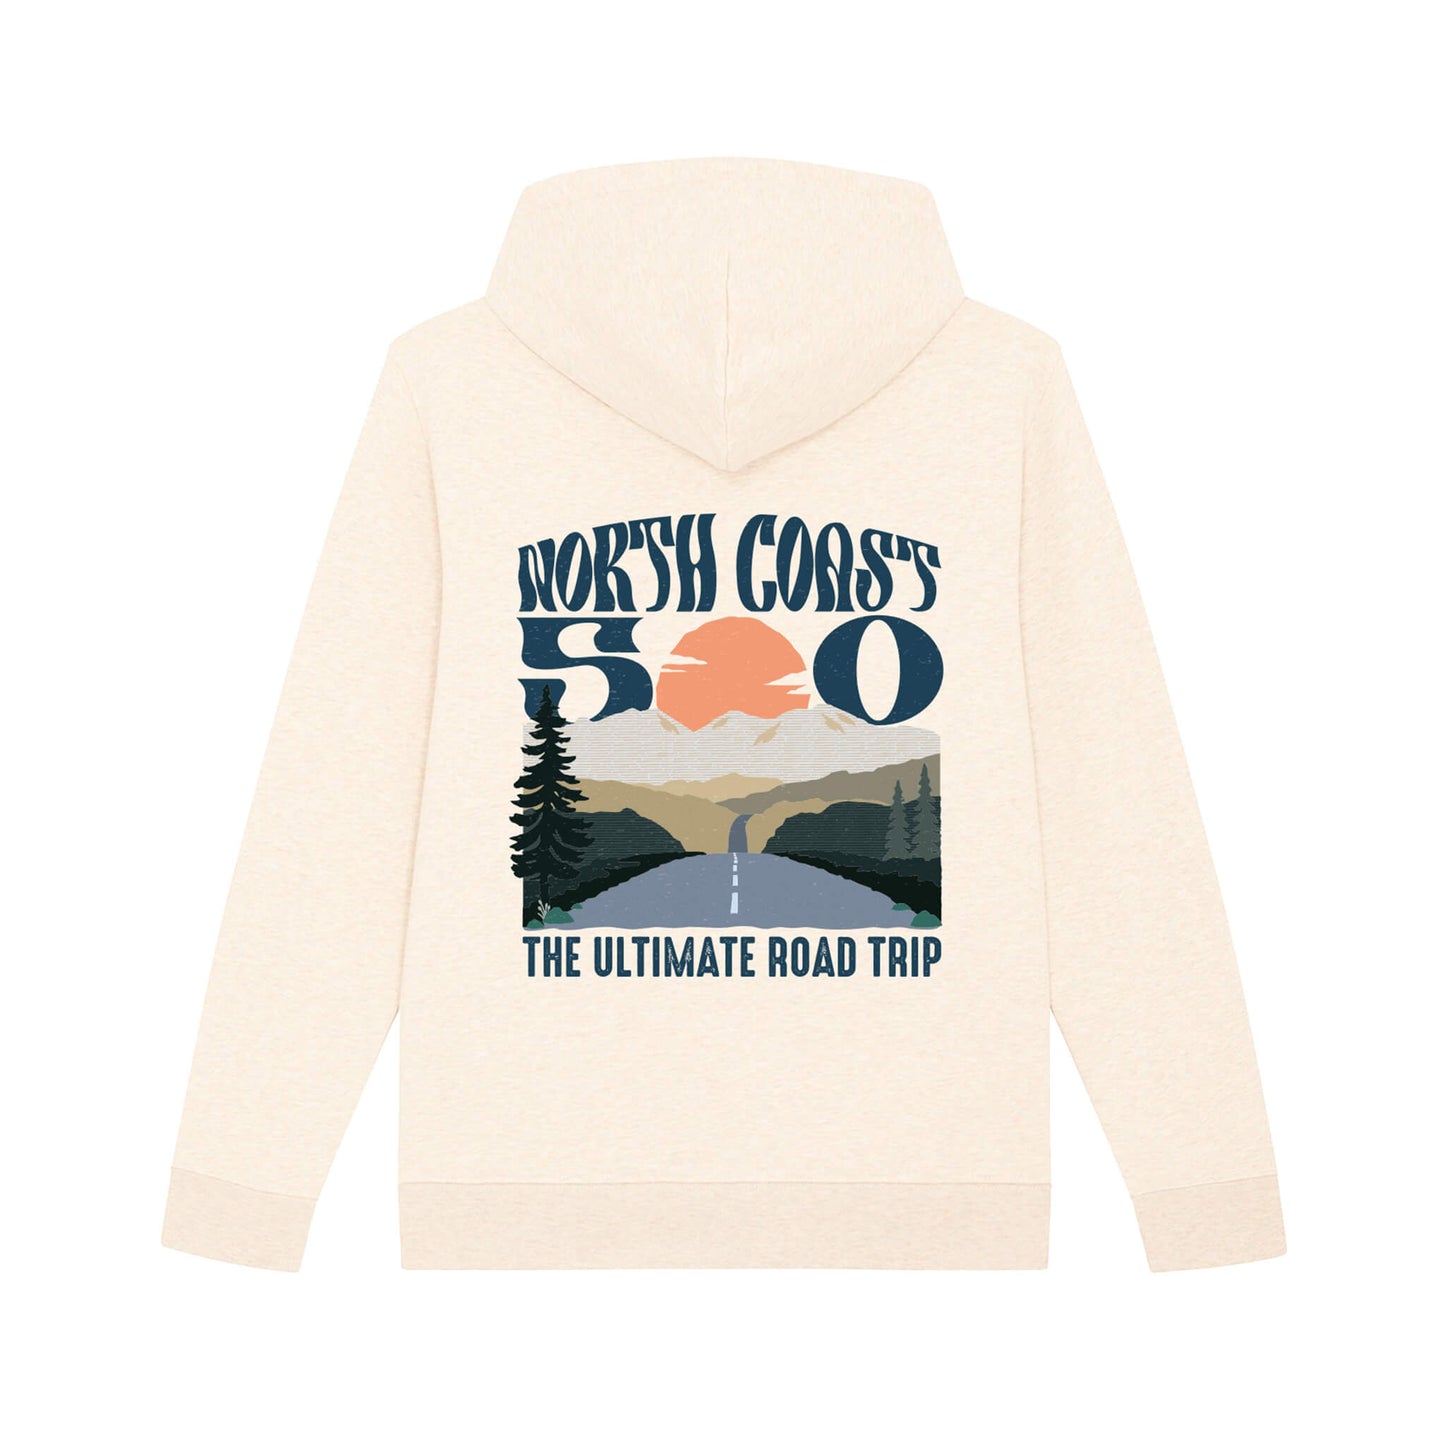 Into the Sunset Organic Cotton Hoodie - Off White - Back View - North Coast 500